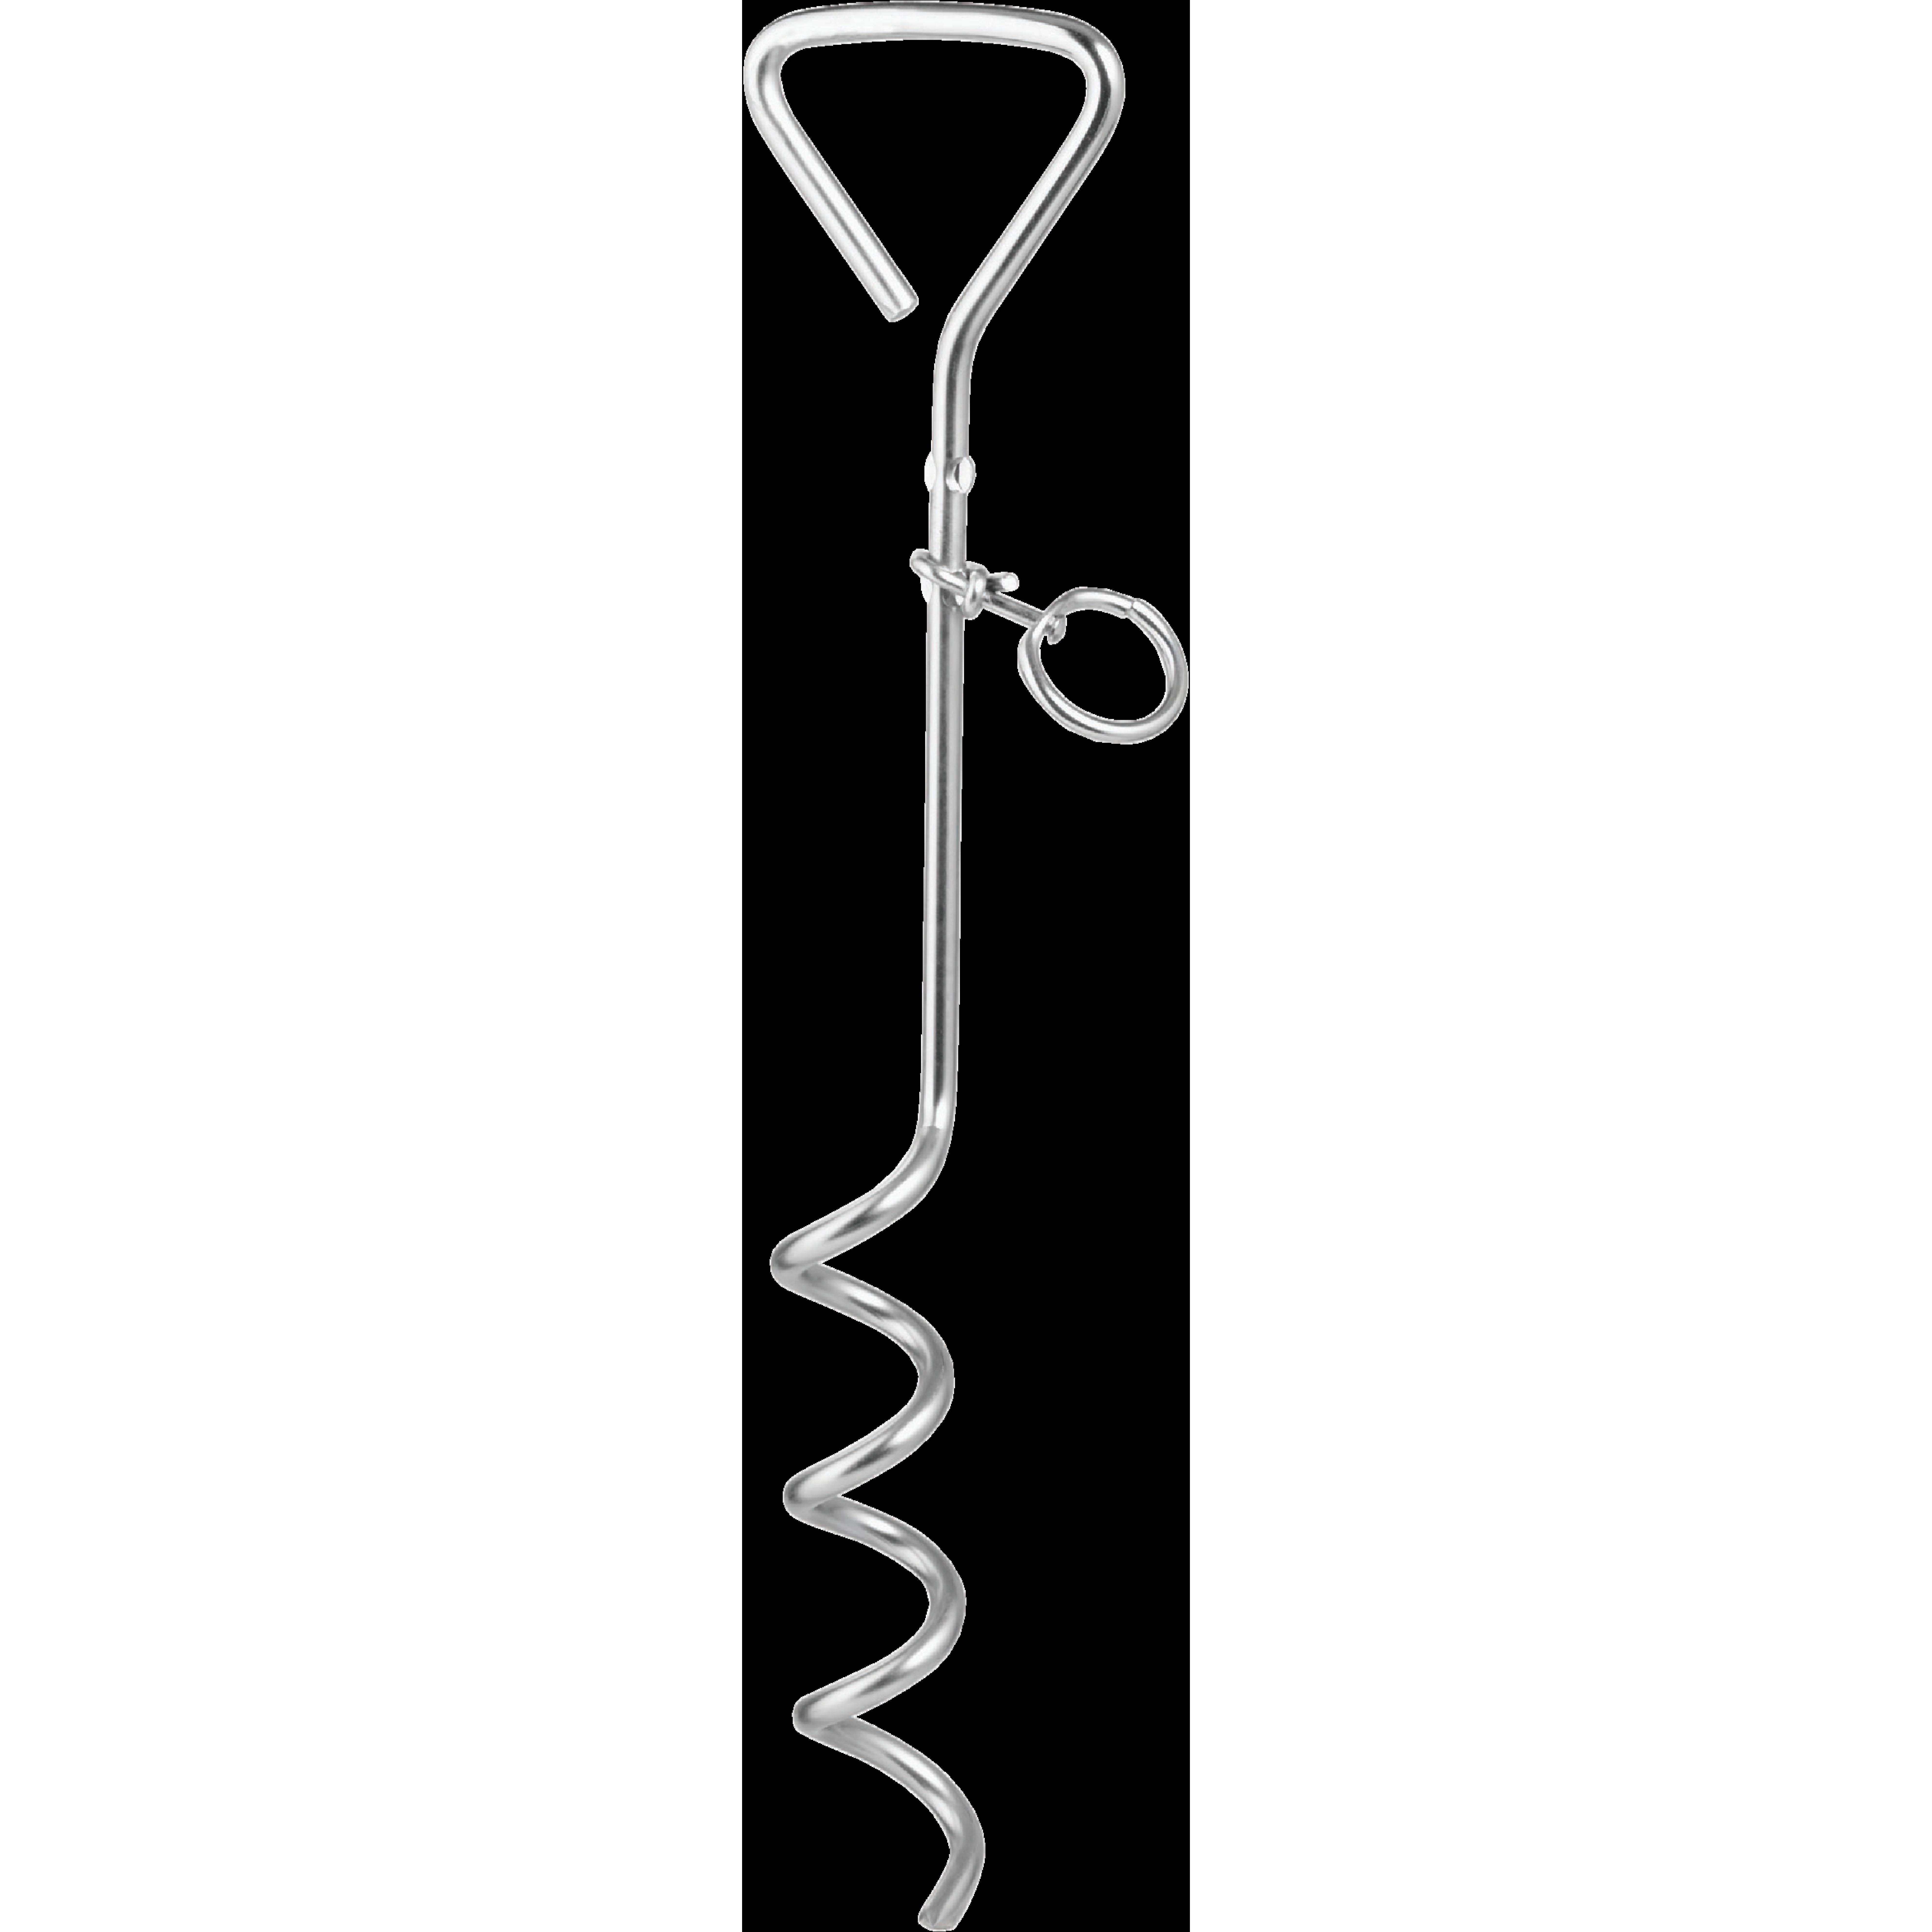 Smart Savers 15.75 In. Corkscrew Iron Dog Tie-Out Stake 10034 Pack of 12 alternate image